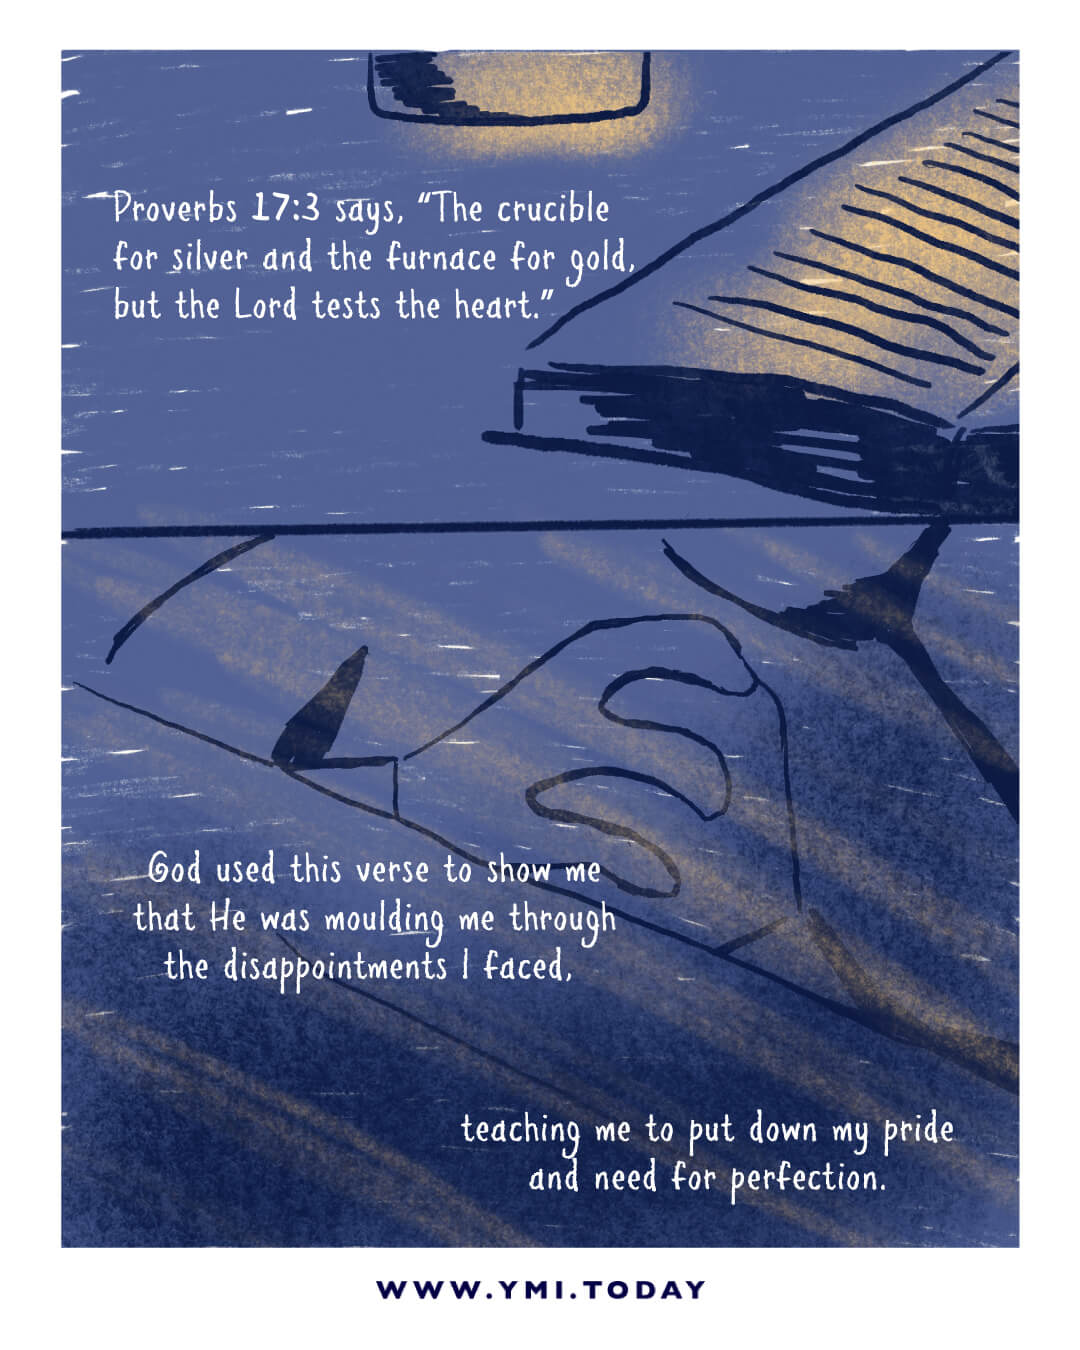 Two panel of comic: close up of the bible and candle, praying hand on the bed